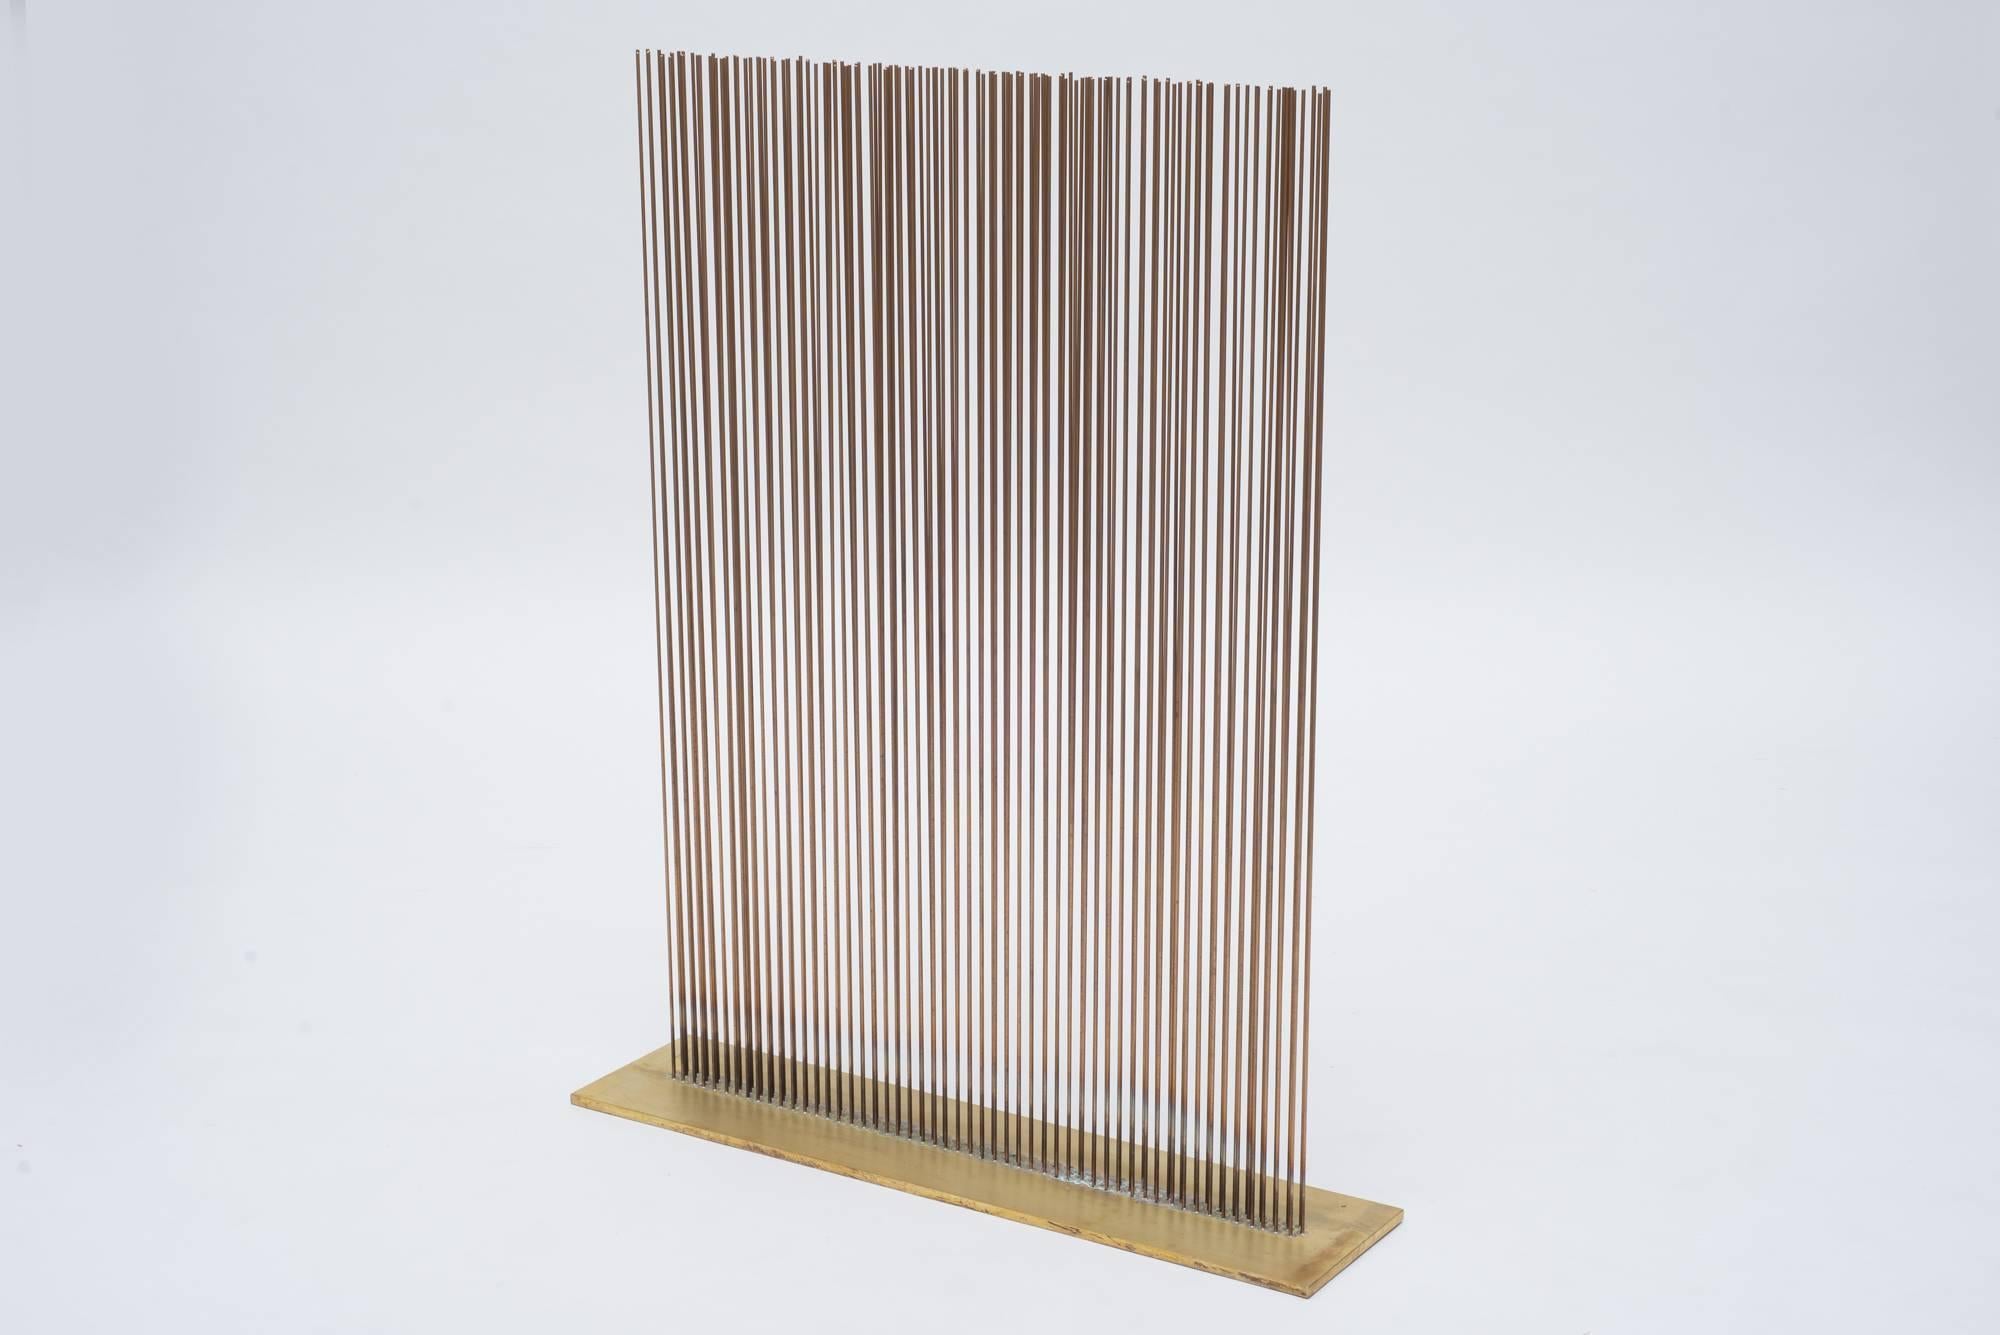 A great form this sonambient sculpture by Val Bertoia possesses the finest qualities of sound and movement the sculptures are known for. The length of each rod allows for maximum sway, the entire piece displaying a lovely wave motion when stroked,